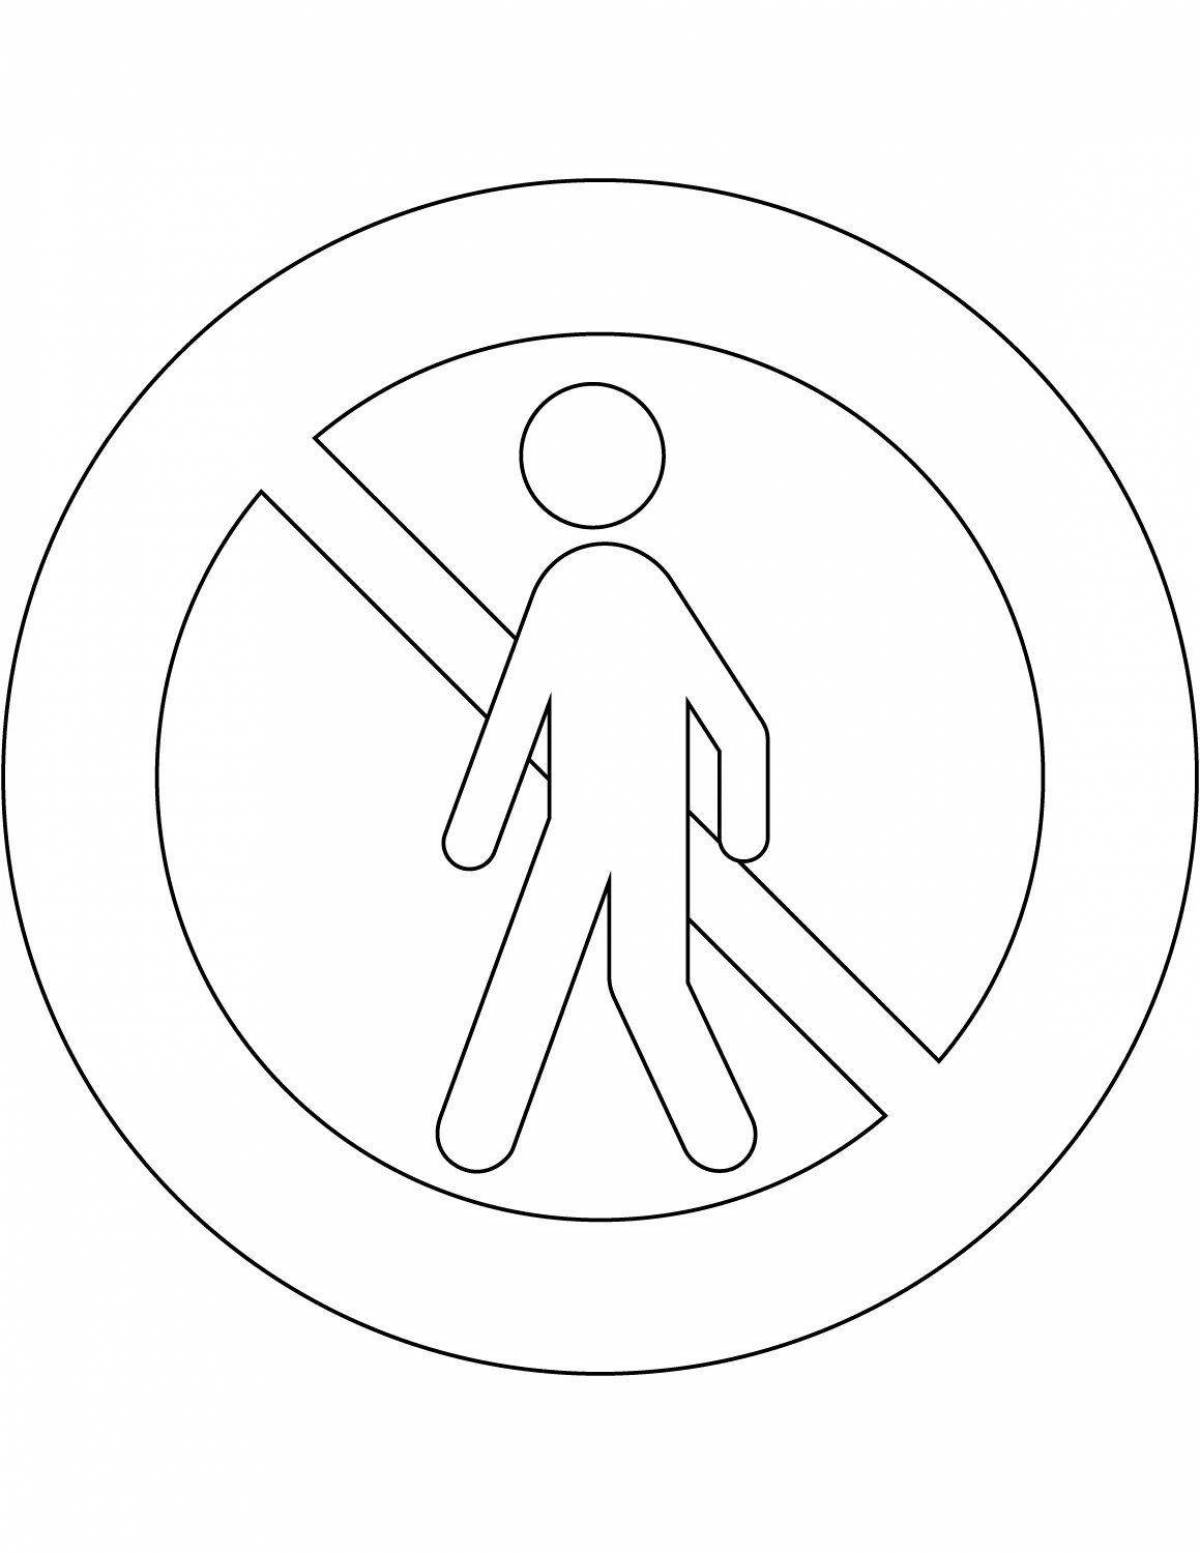 Shining No Pedestrian Traffic Sign coloring page